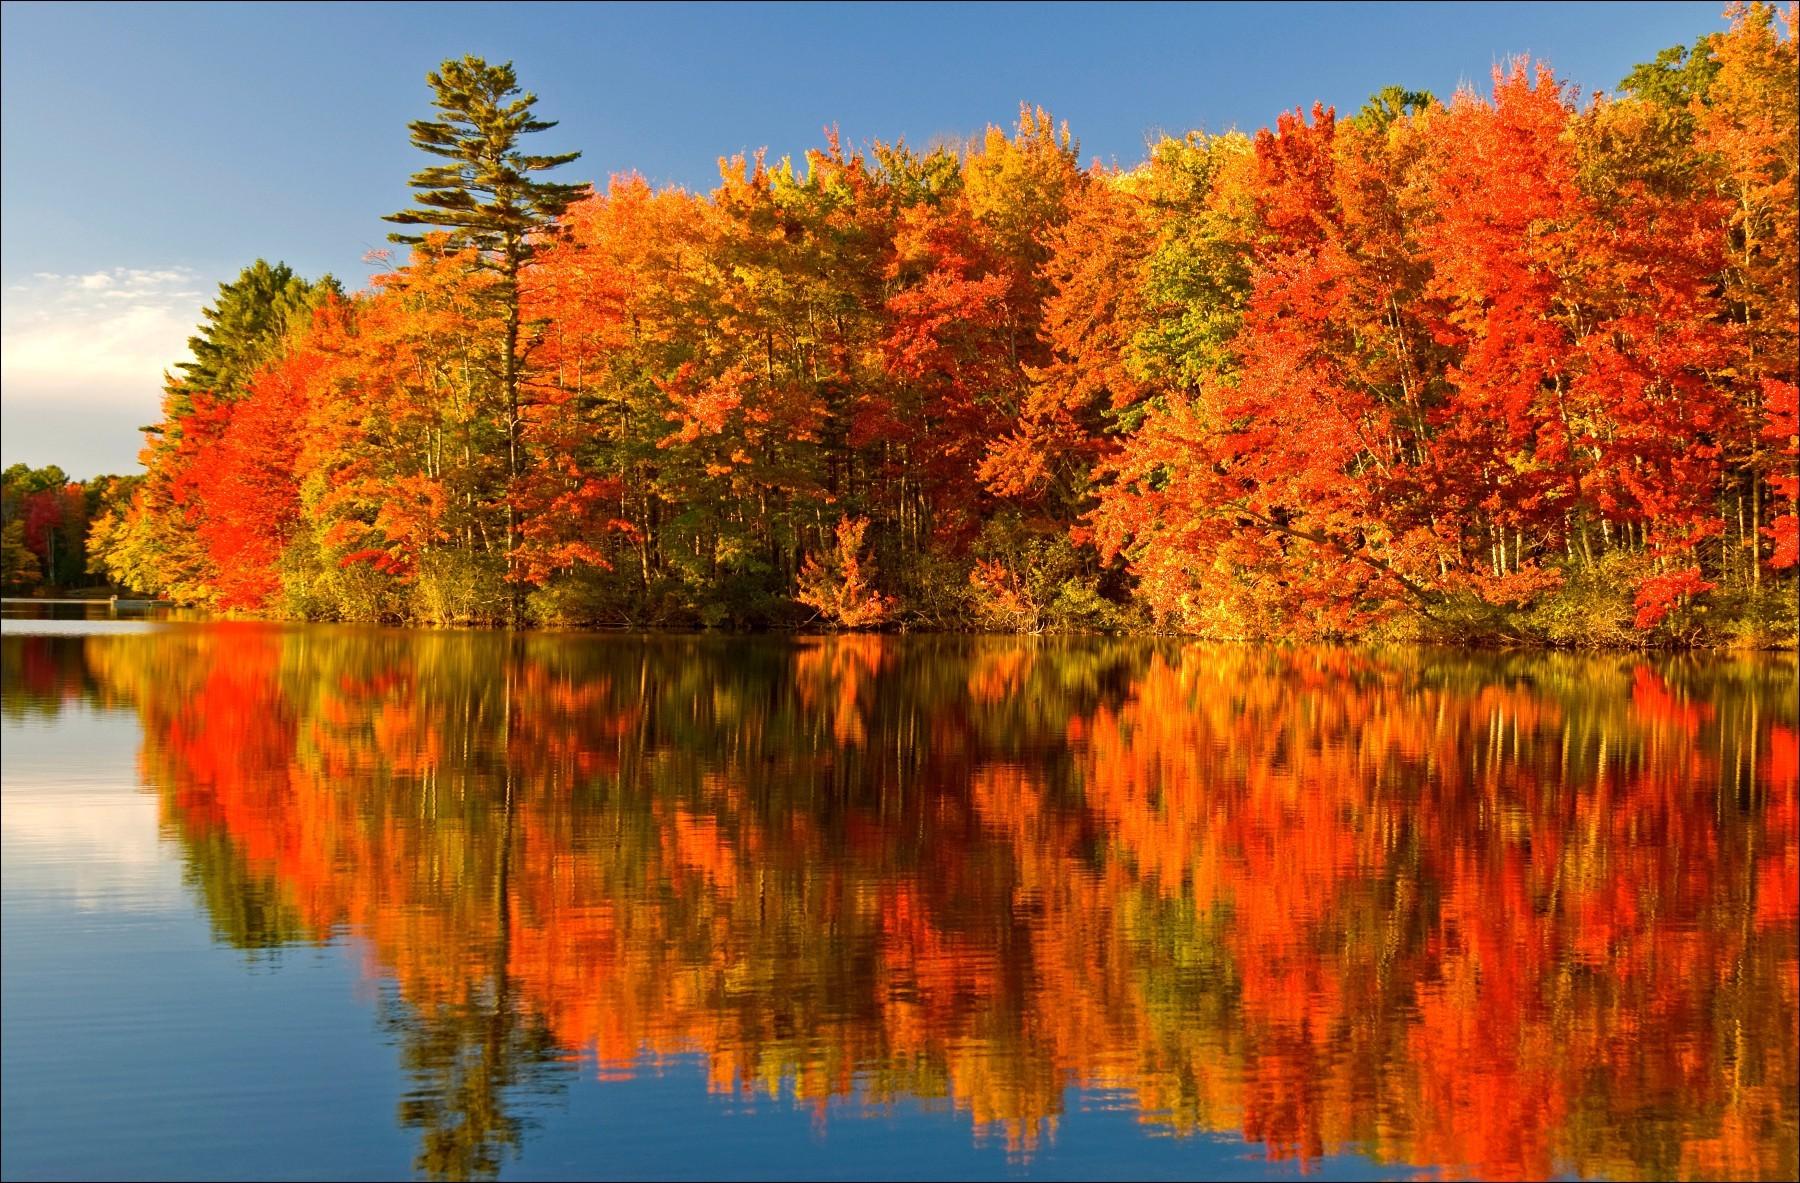 Other, Autumn, Colours, Algonquin, Park, Ontario, Reflection, Lake, Colors, Water, Trees, Leaves, Background, Image, HD Wallpaper, Amazing